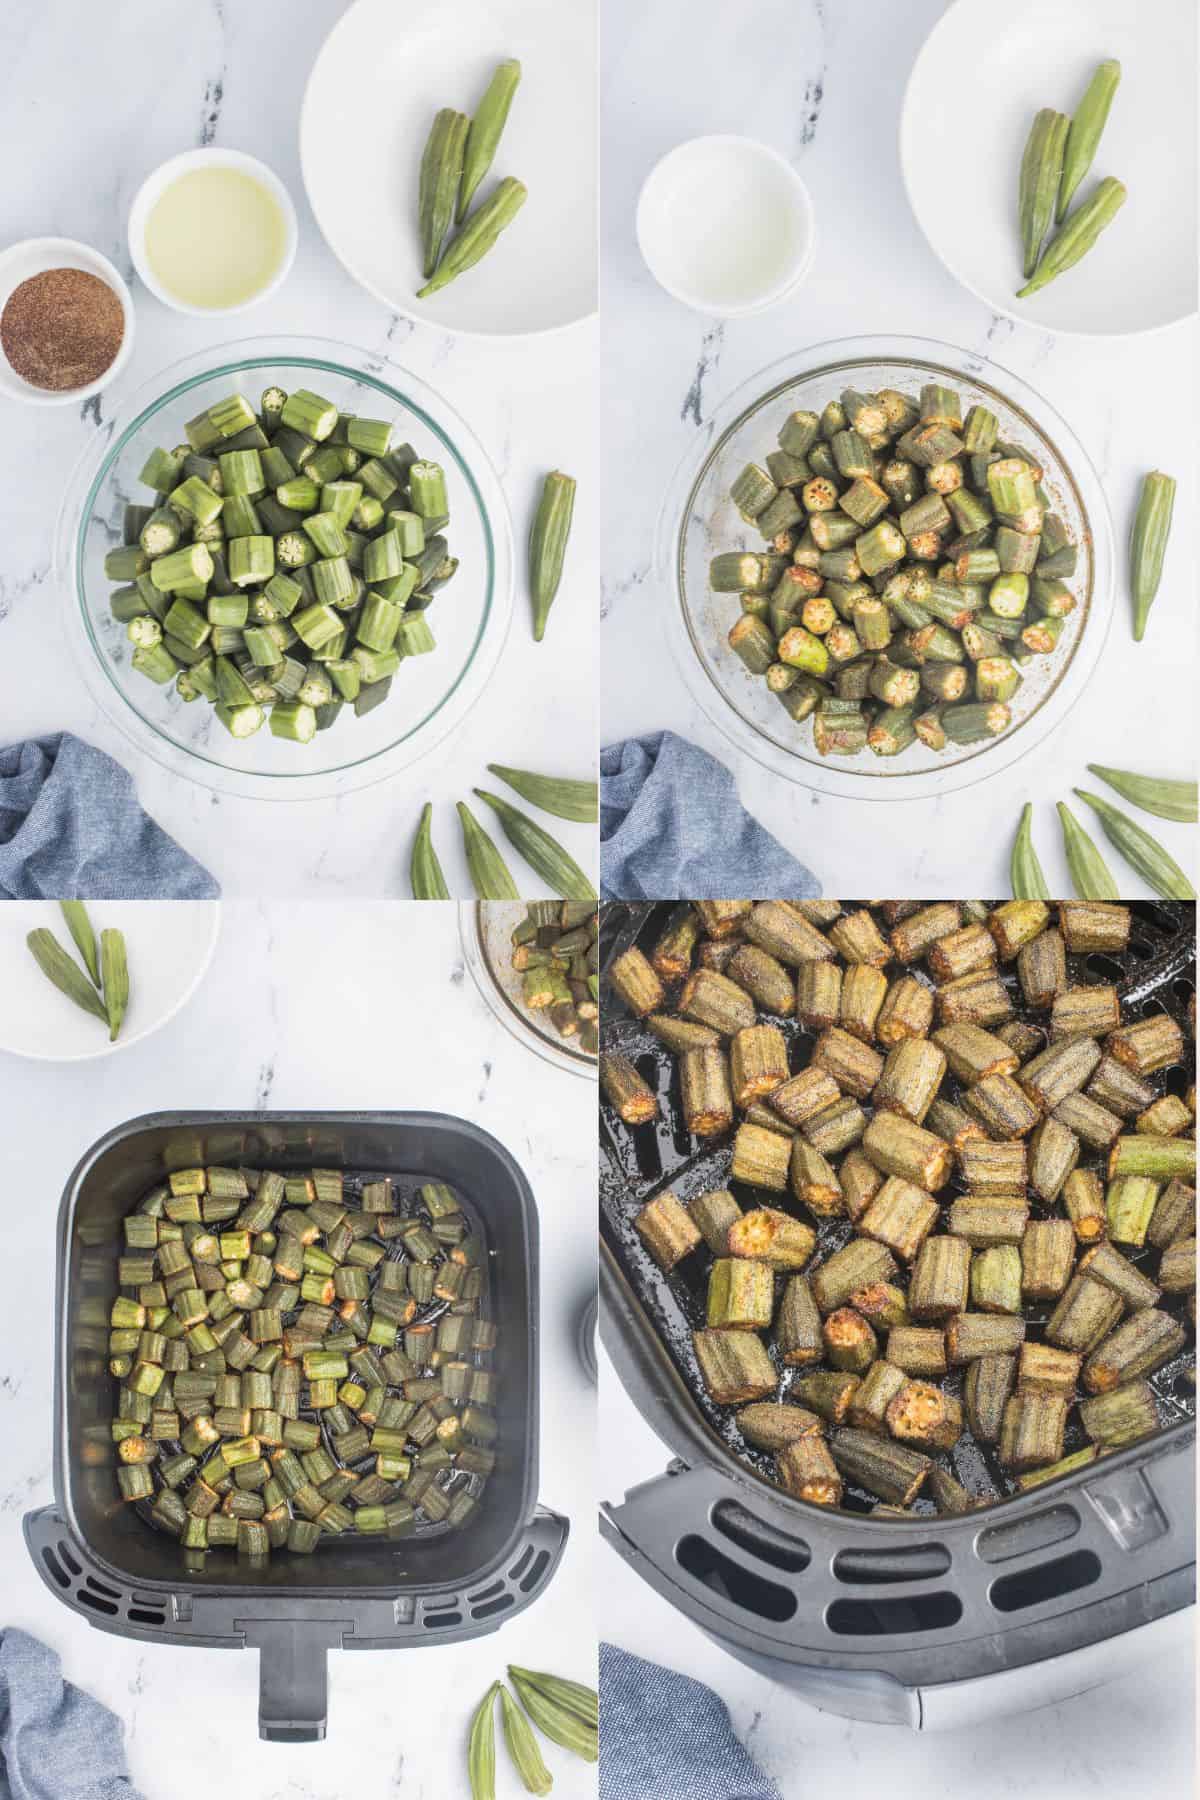 This collage features multiple images depicting the process of preparing and cooking okra using an air fryer. The first image shows cut okra placed in a bowl. In the second image, the okra is seasoned and lightly coated with oil. The third image displays raw okra arranged inside the air fryer. Lastly, the fourth image showcases the cooked okra, perfectly air-fried and ready to be enjoyed.